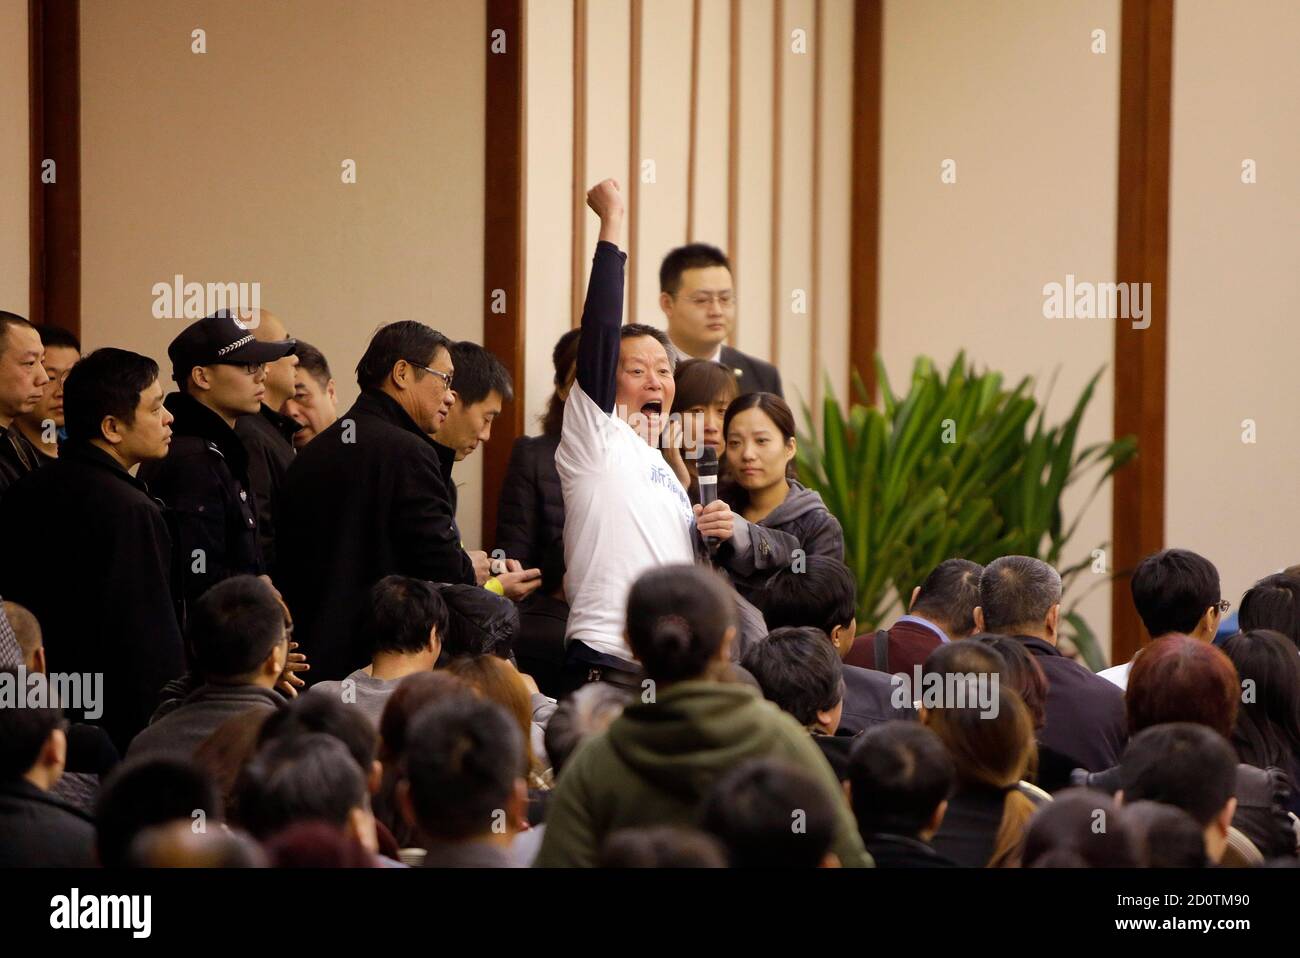 A family member of a passenger onboard Malaysia Airlines Flight MH370 raises his fist as he shouts slogans to protest against the lack of new information after a routine briefing given by Malaysia Airlines at Lido Hotel in Beijing, March 22, 2014. Two weeks after a Malaysia Airlines airliner went missing with 239 people on board, officials are bracing for the 'long haul' as searches by more than two dozen countries turn up little but frustration and fresh questions. REUTERS/Jason Lee (CHINA - Tags: DISASTER TRANSPORT) Stock Photo